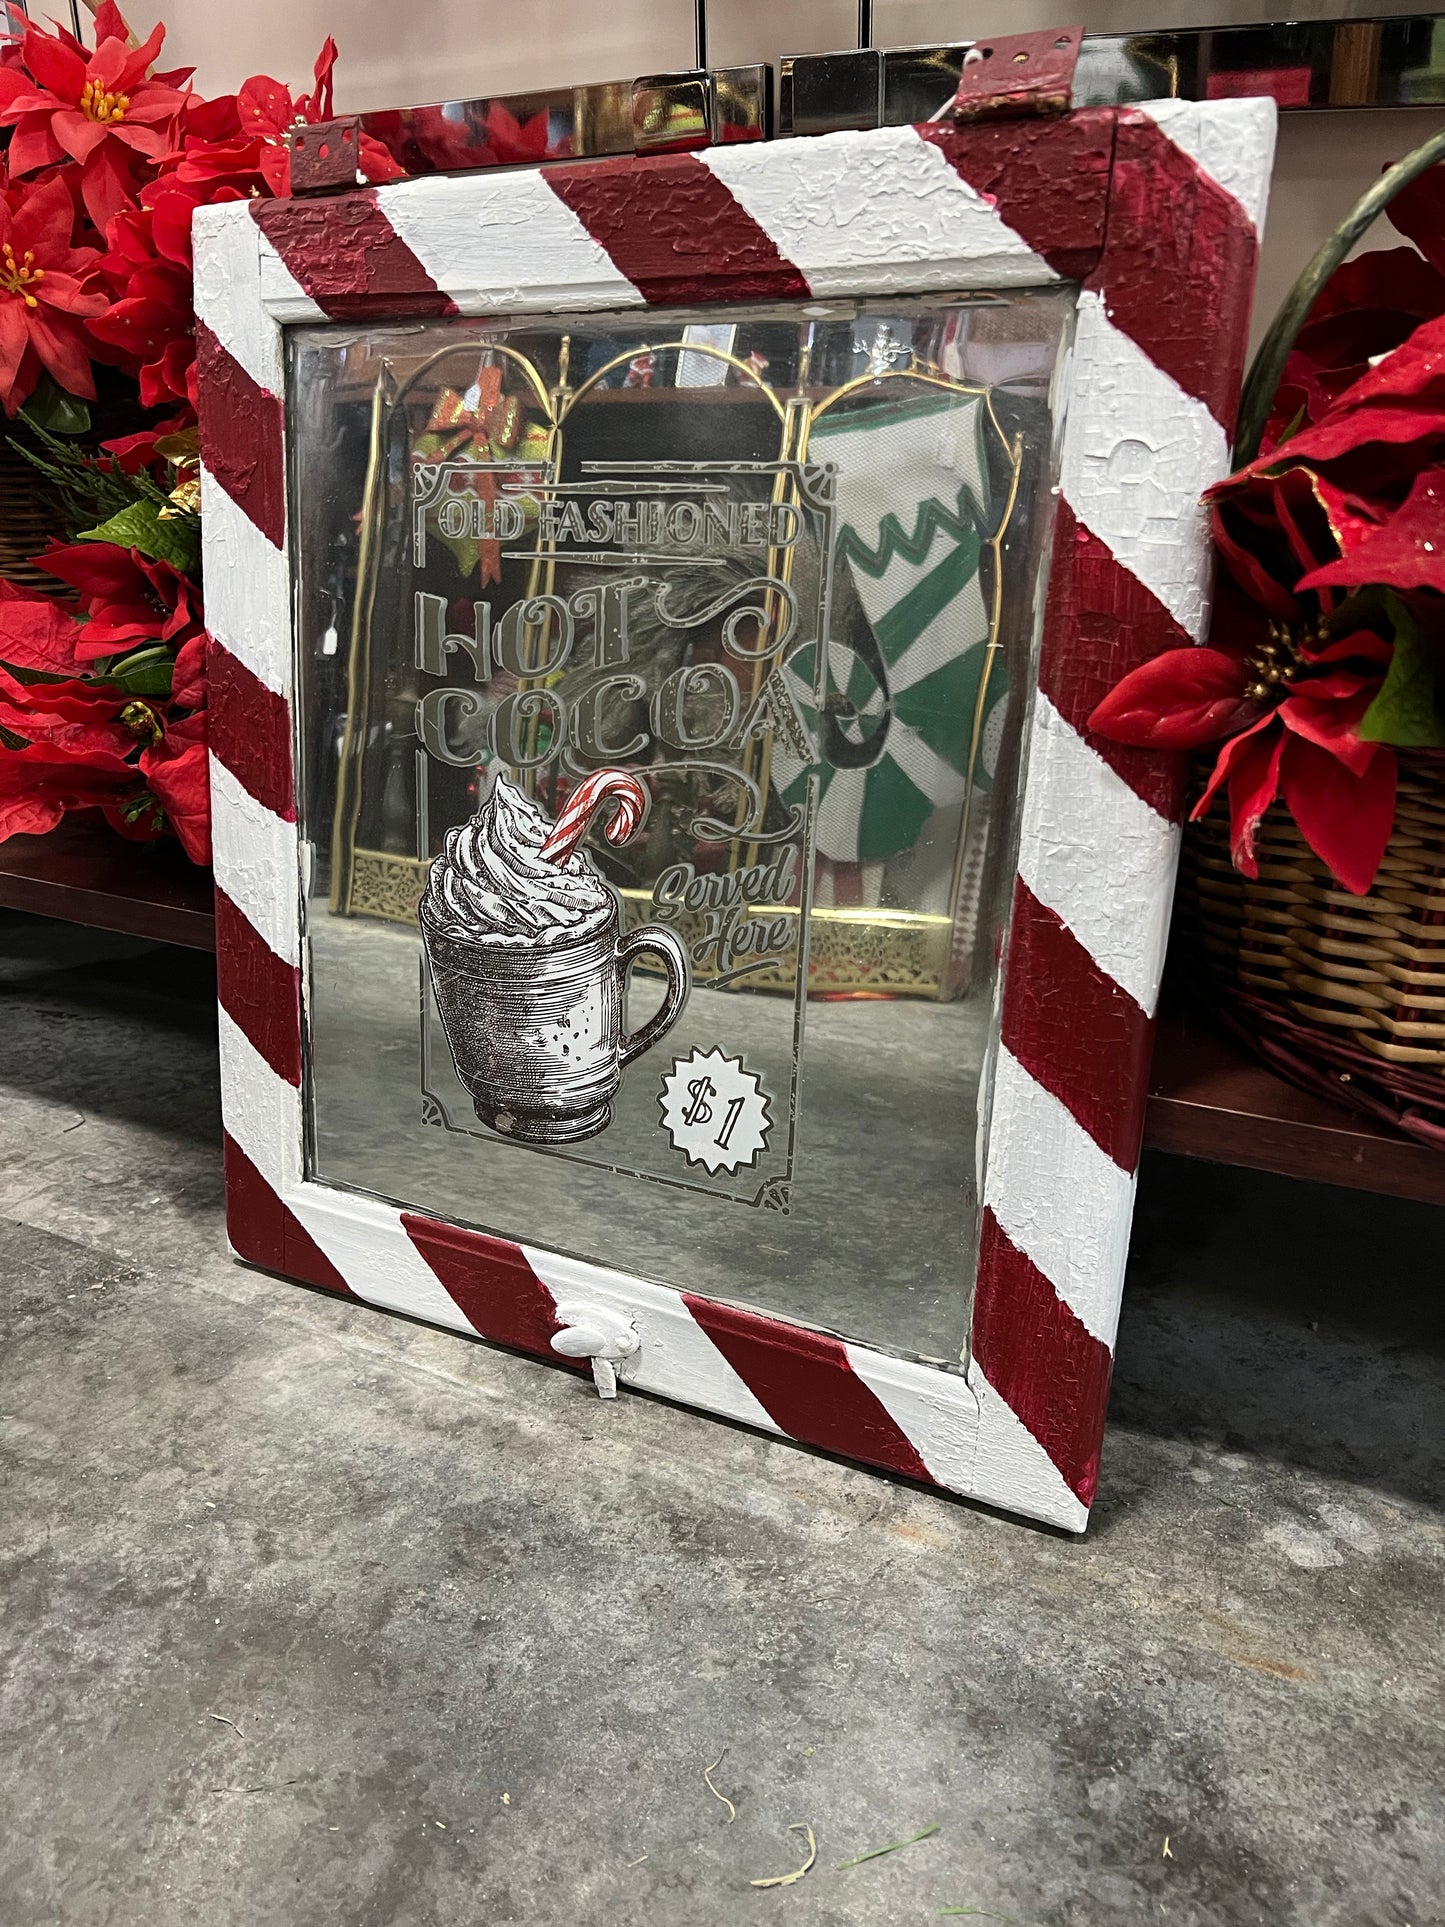 Candy cane Striped Mirror “Old Fashioned…”